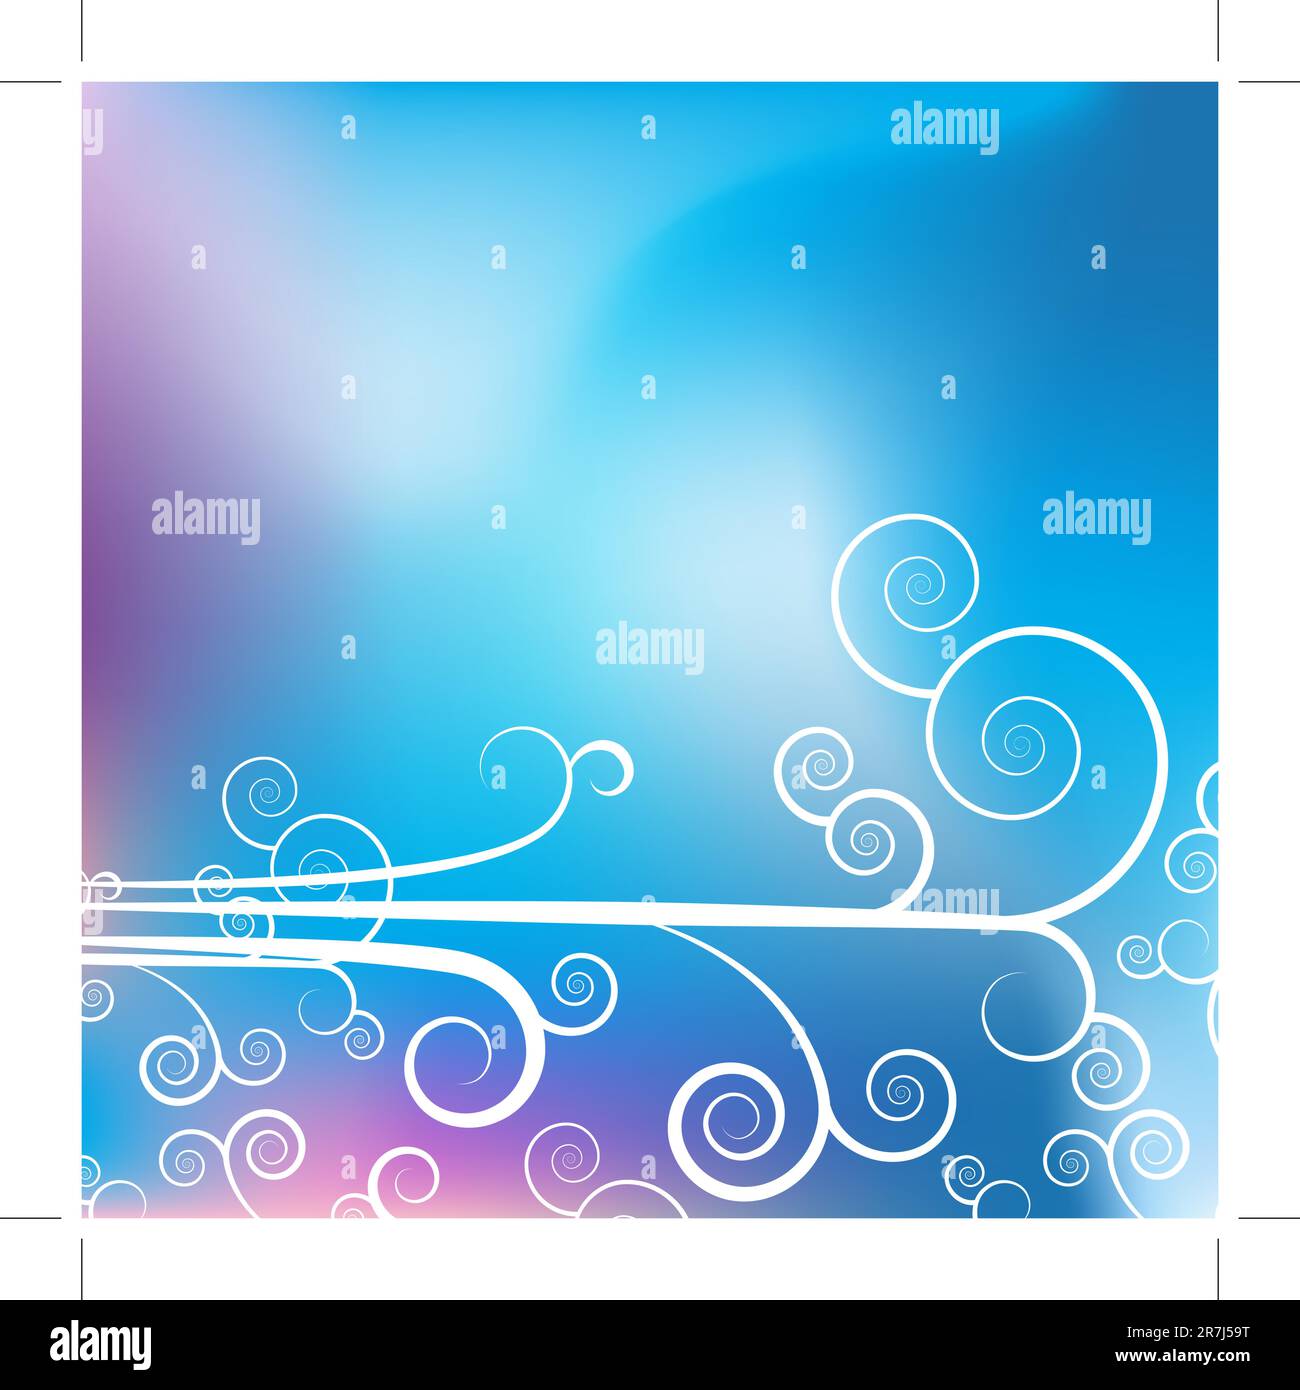 A swirl Stock Vector Images - Alamy